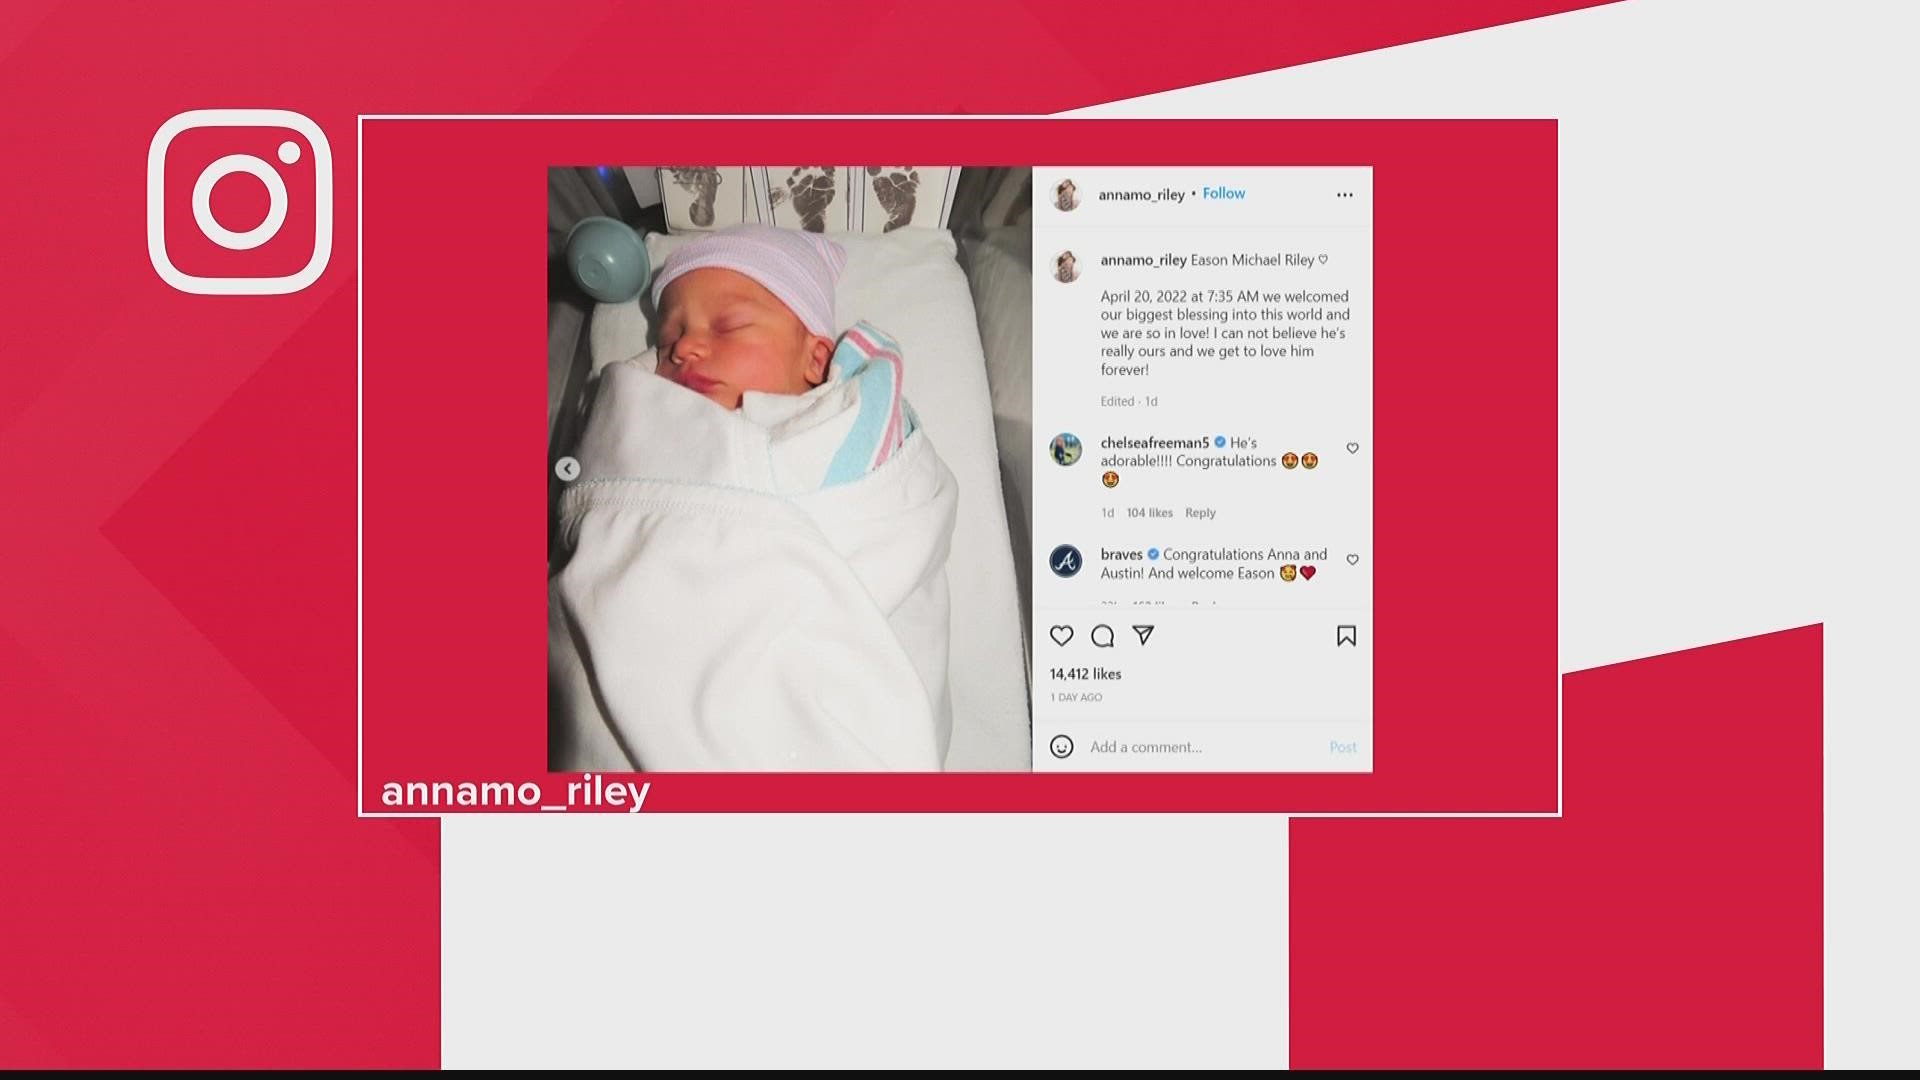 They named him Eason Michael Riley, the mother shared in an Instagram post.